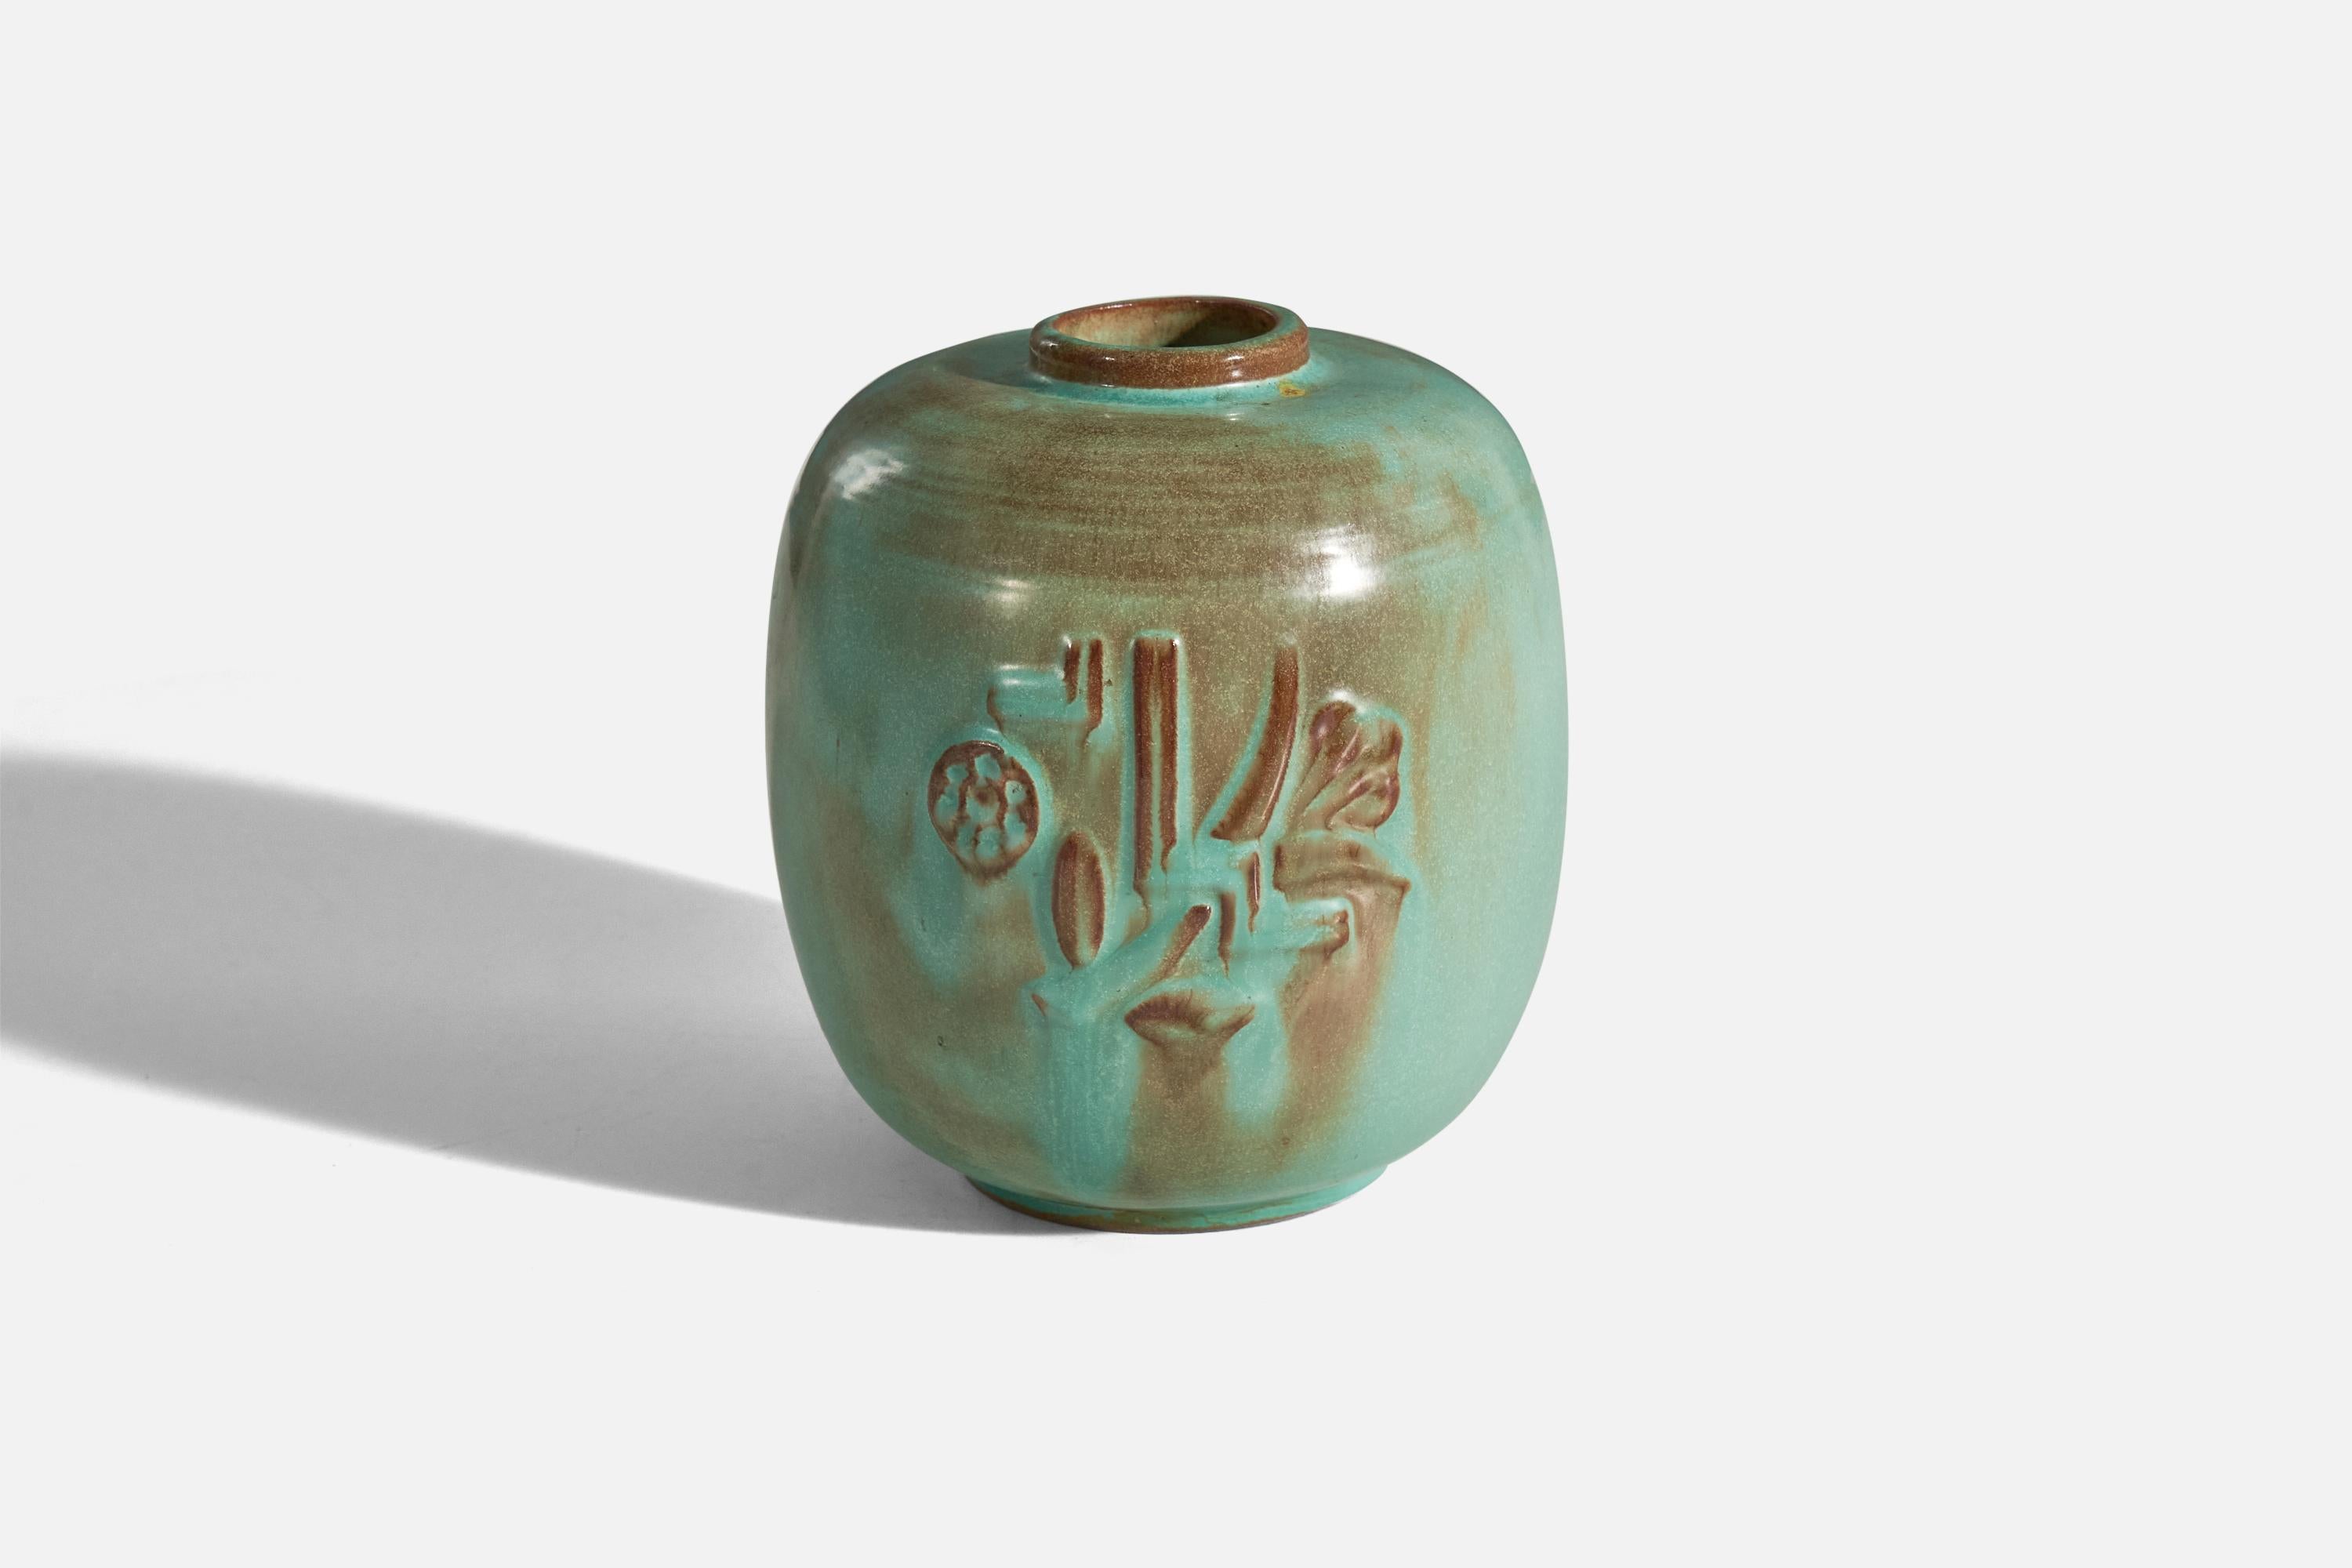 A green and brown, glazed earthenware vase designed and produced by Upsala-Ekeby, Sweden, 1940s.

